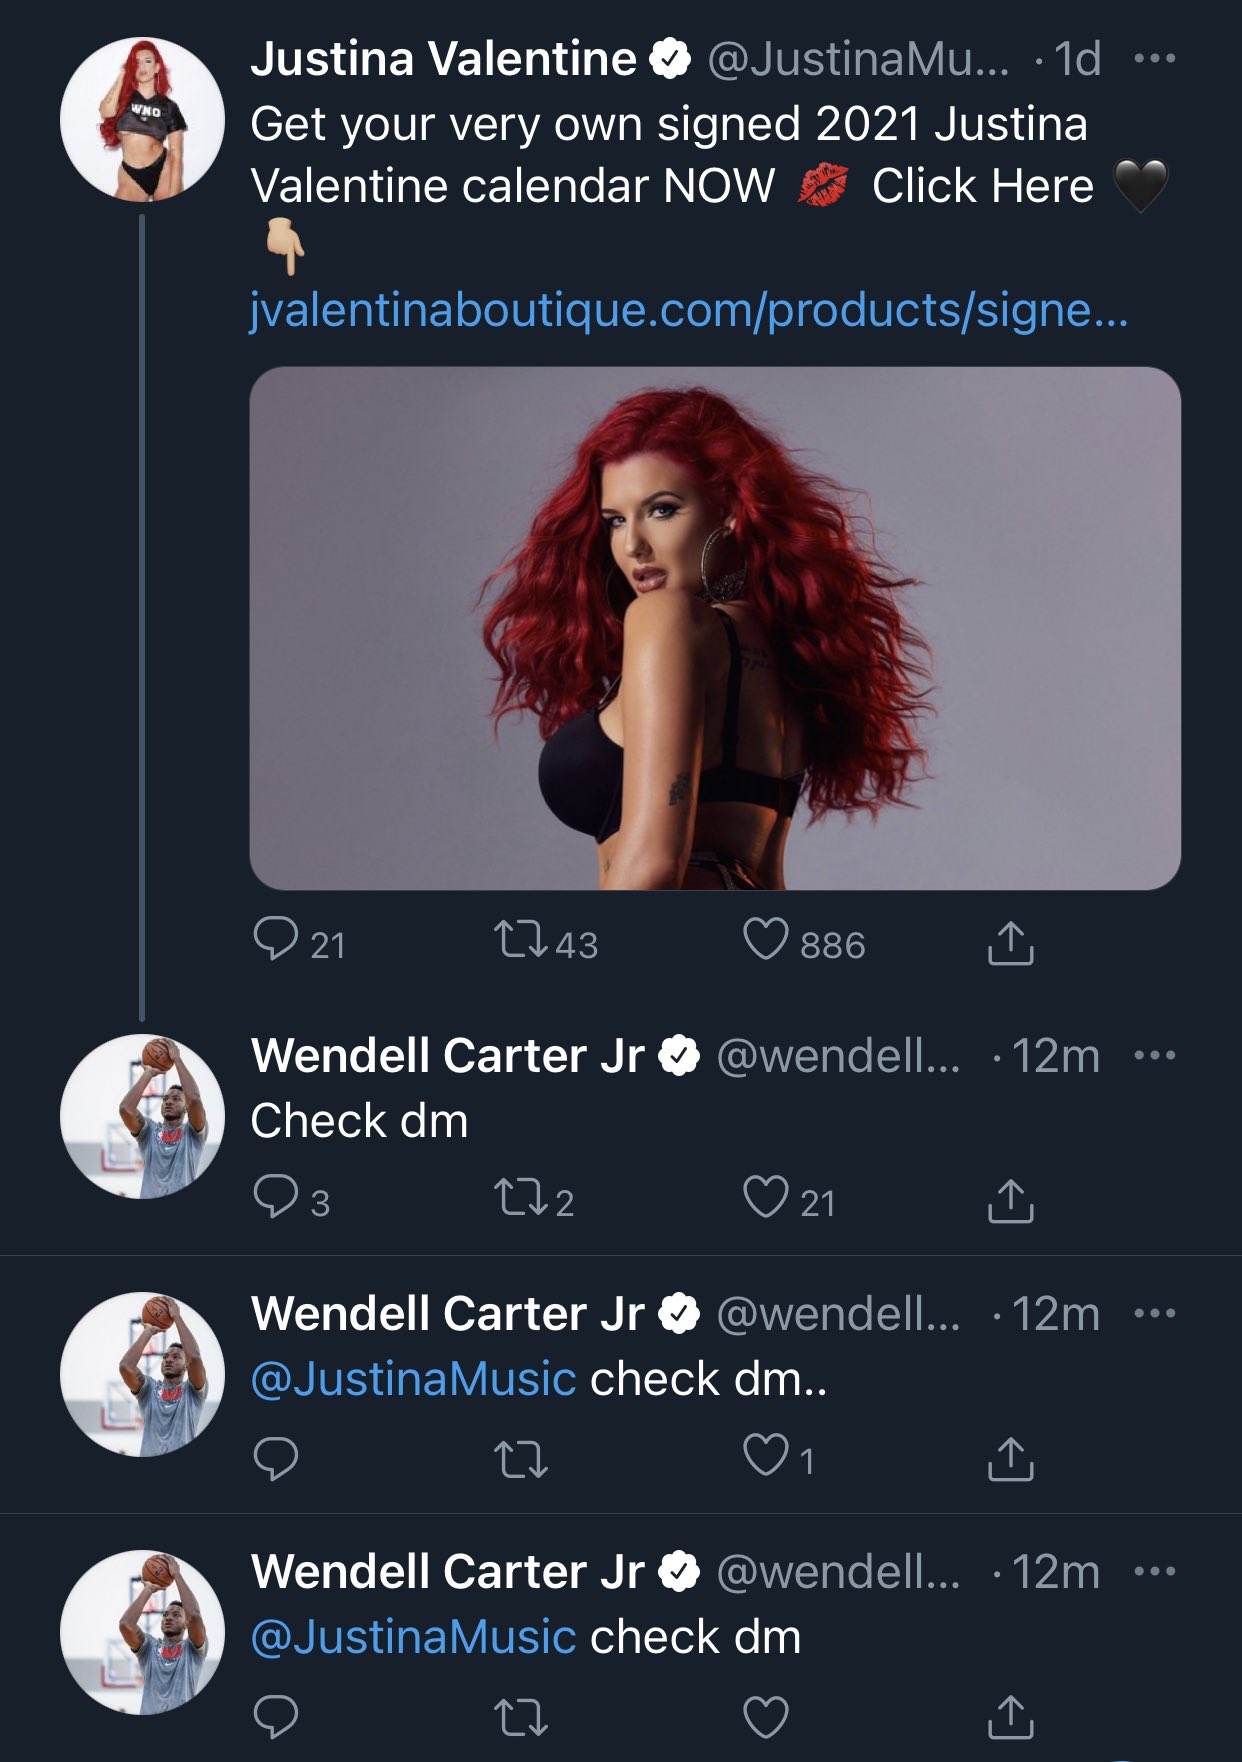 Wendell Carter Jr claims his Twitter was hacked after 'check dm' comments to Justina Valentine - THE SPORTS ROOM